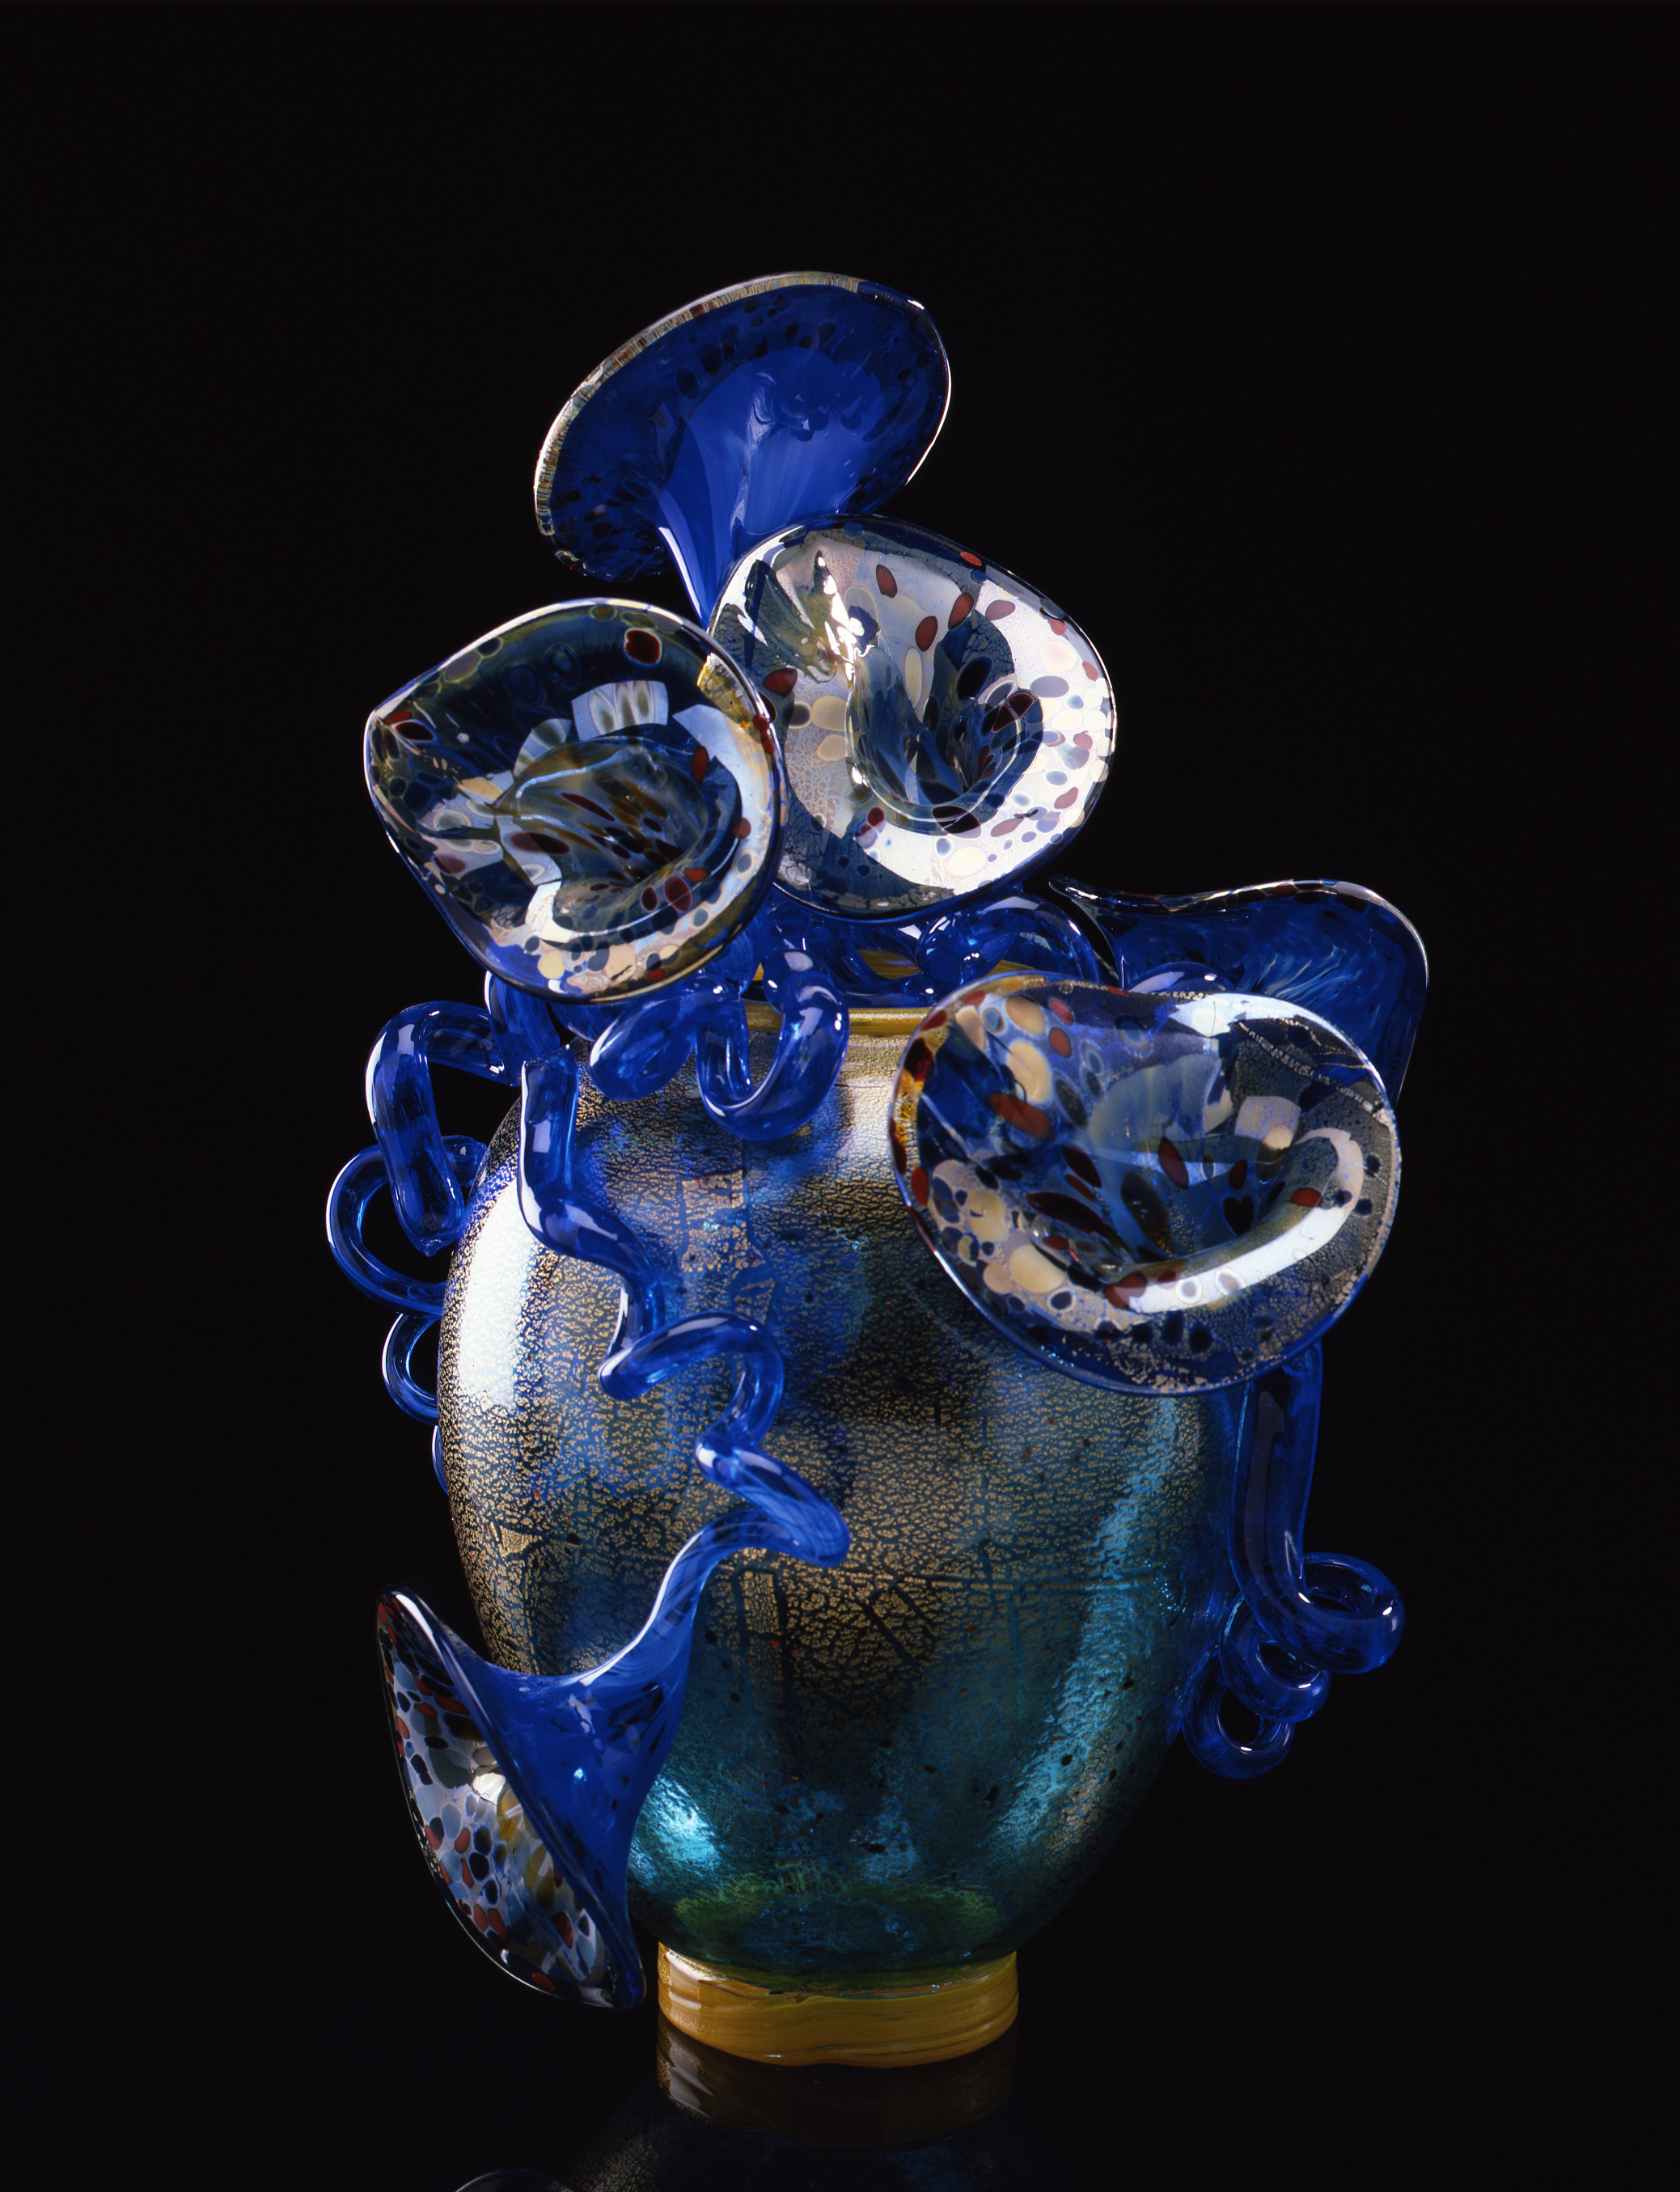  Dale Chihuly,&nbsp; Green and Gold Venetian &nbsp;(1990, glass, 23 x 17 x 16 inches) 